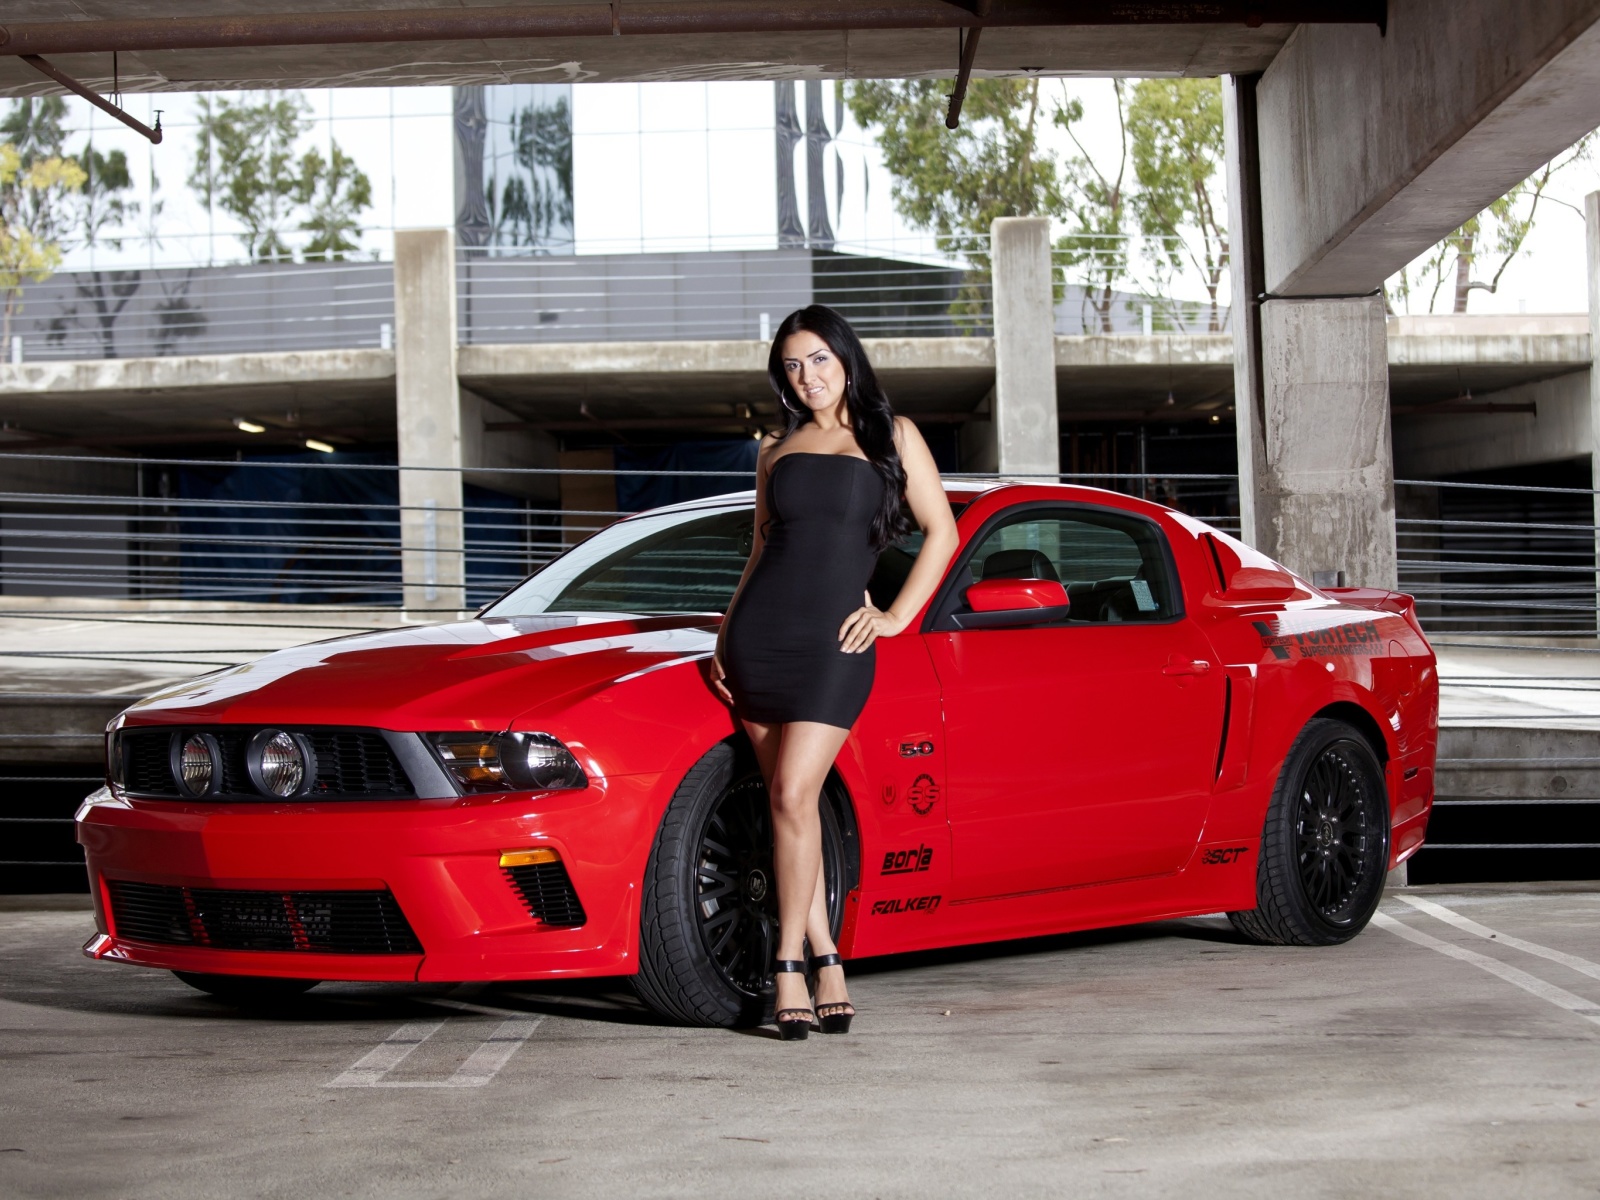 Ford Mustang GT Vortech with Brunette Girl wallpaper 1600x1200